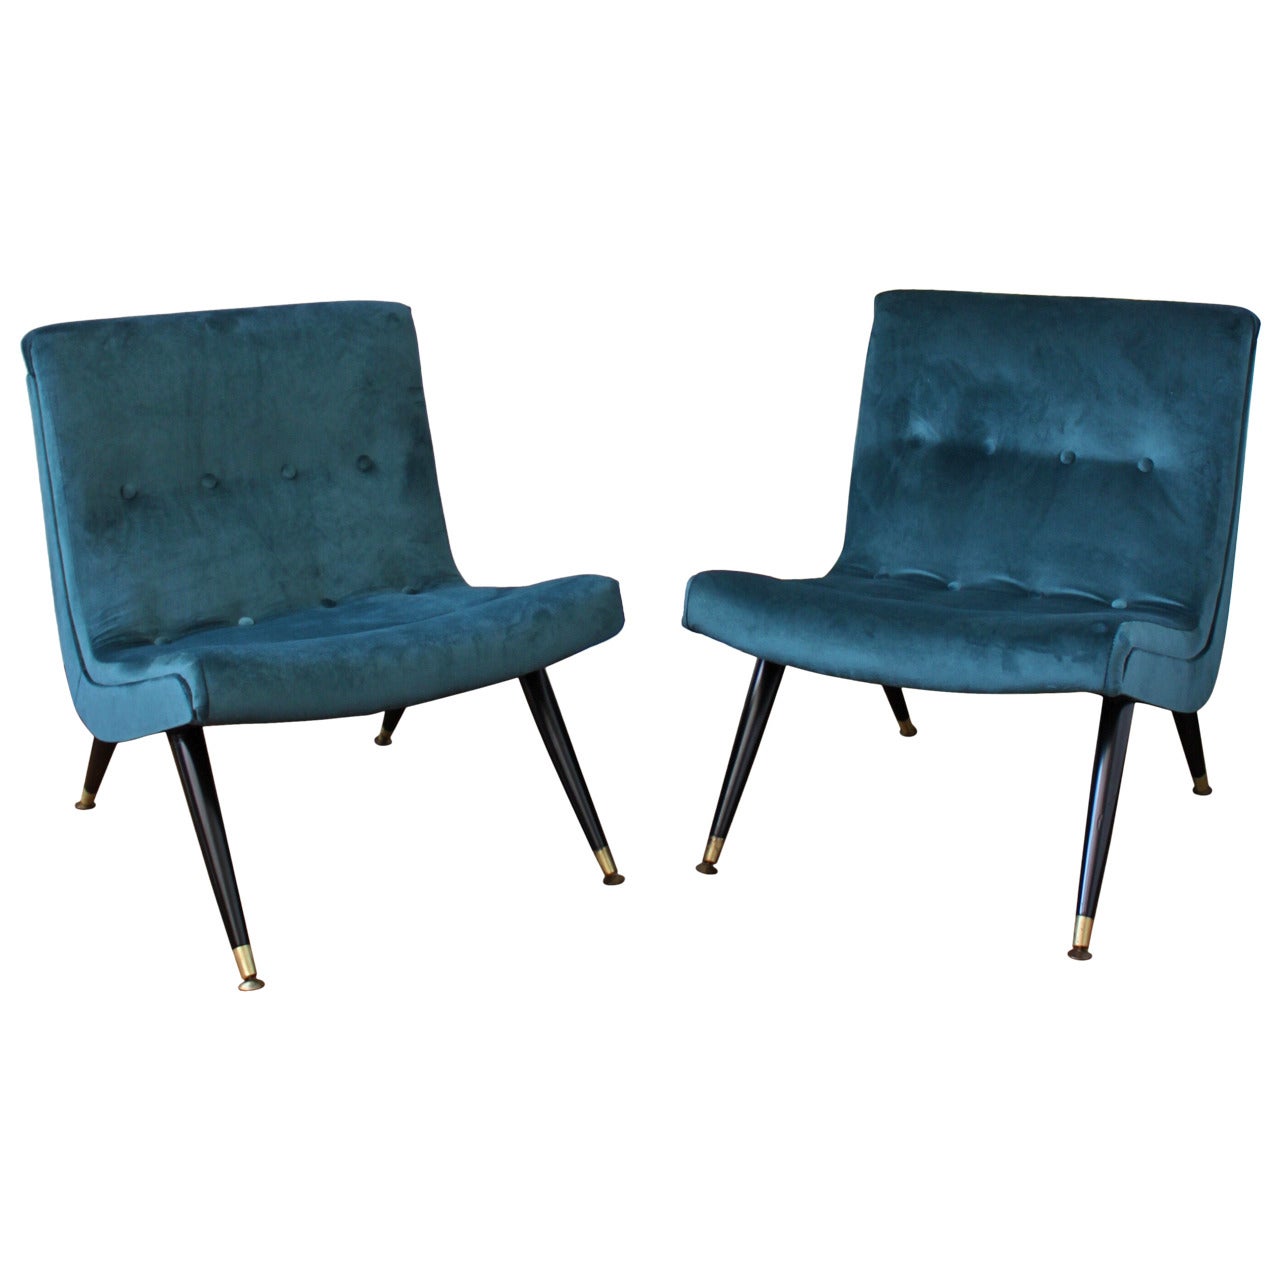 Exquisite Scoop Lounge Chairs in a Buttery Peacock Velvet by Milo Baughman